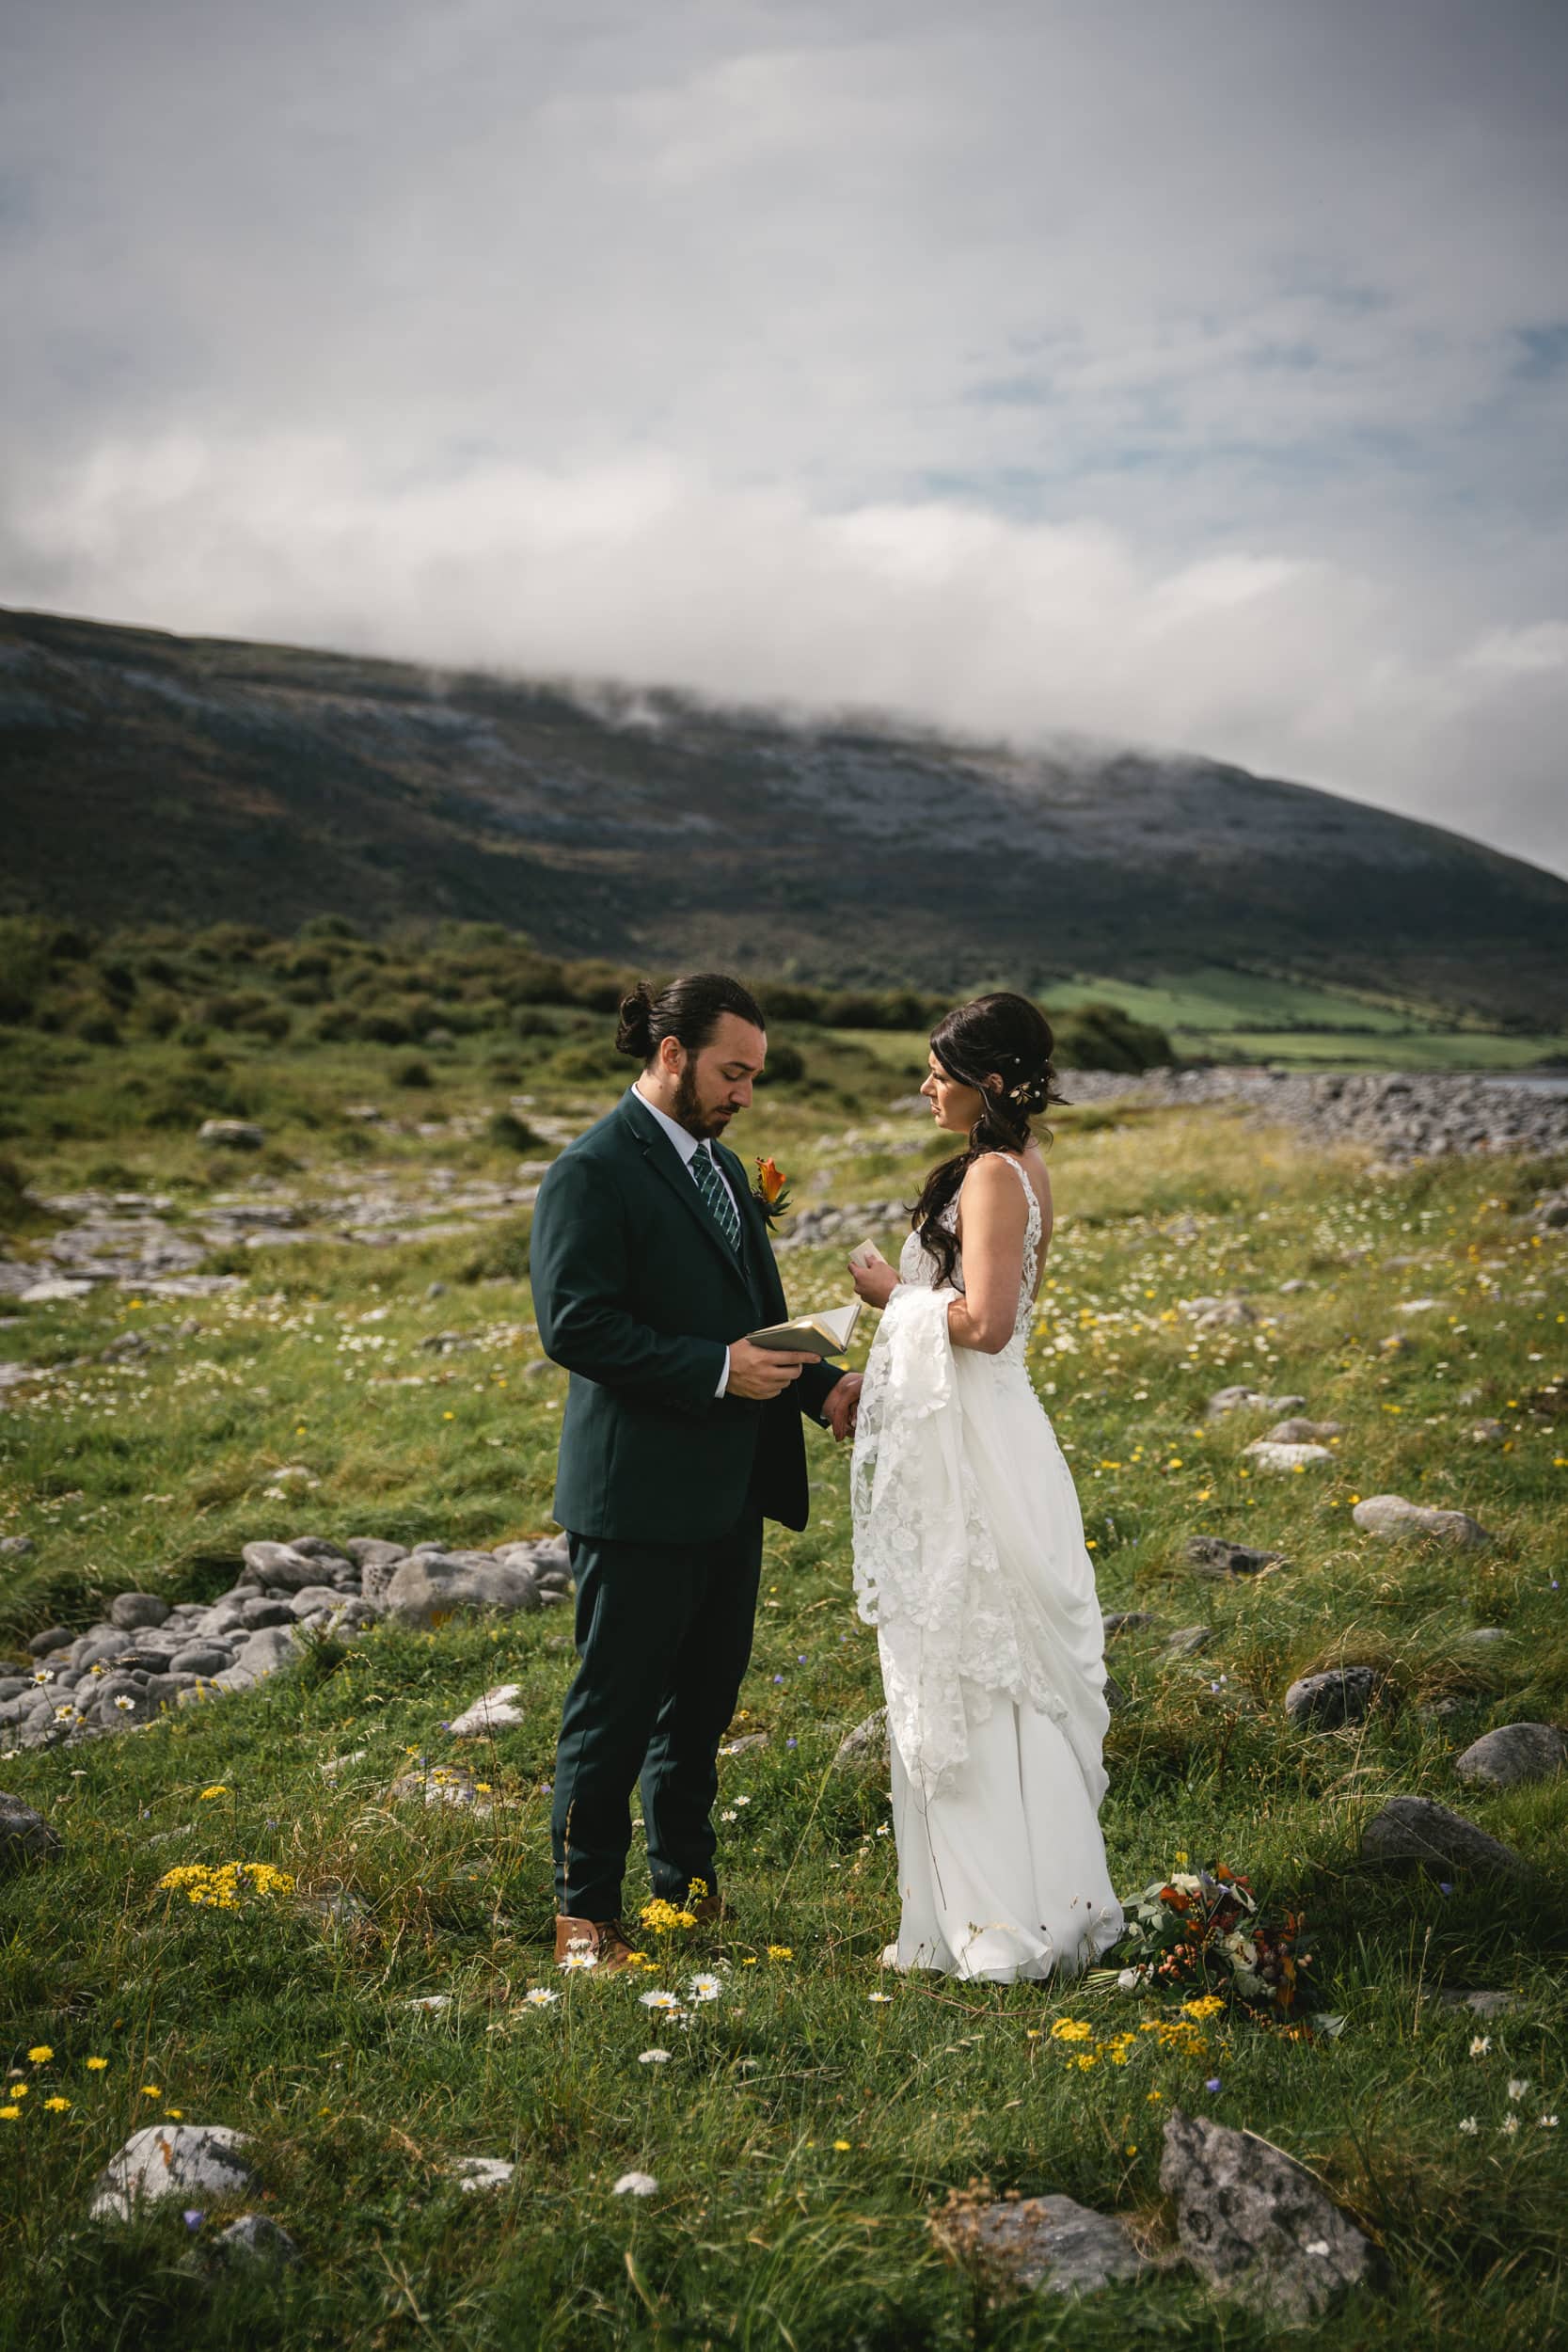 Ancient ruins, timeless love: Jesse and Sal's Irish elopement.